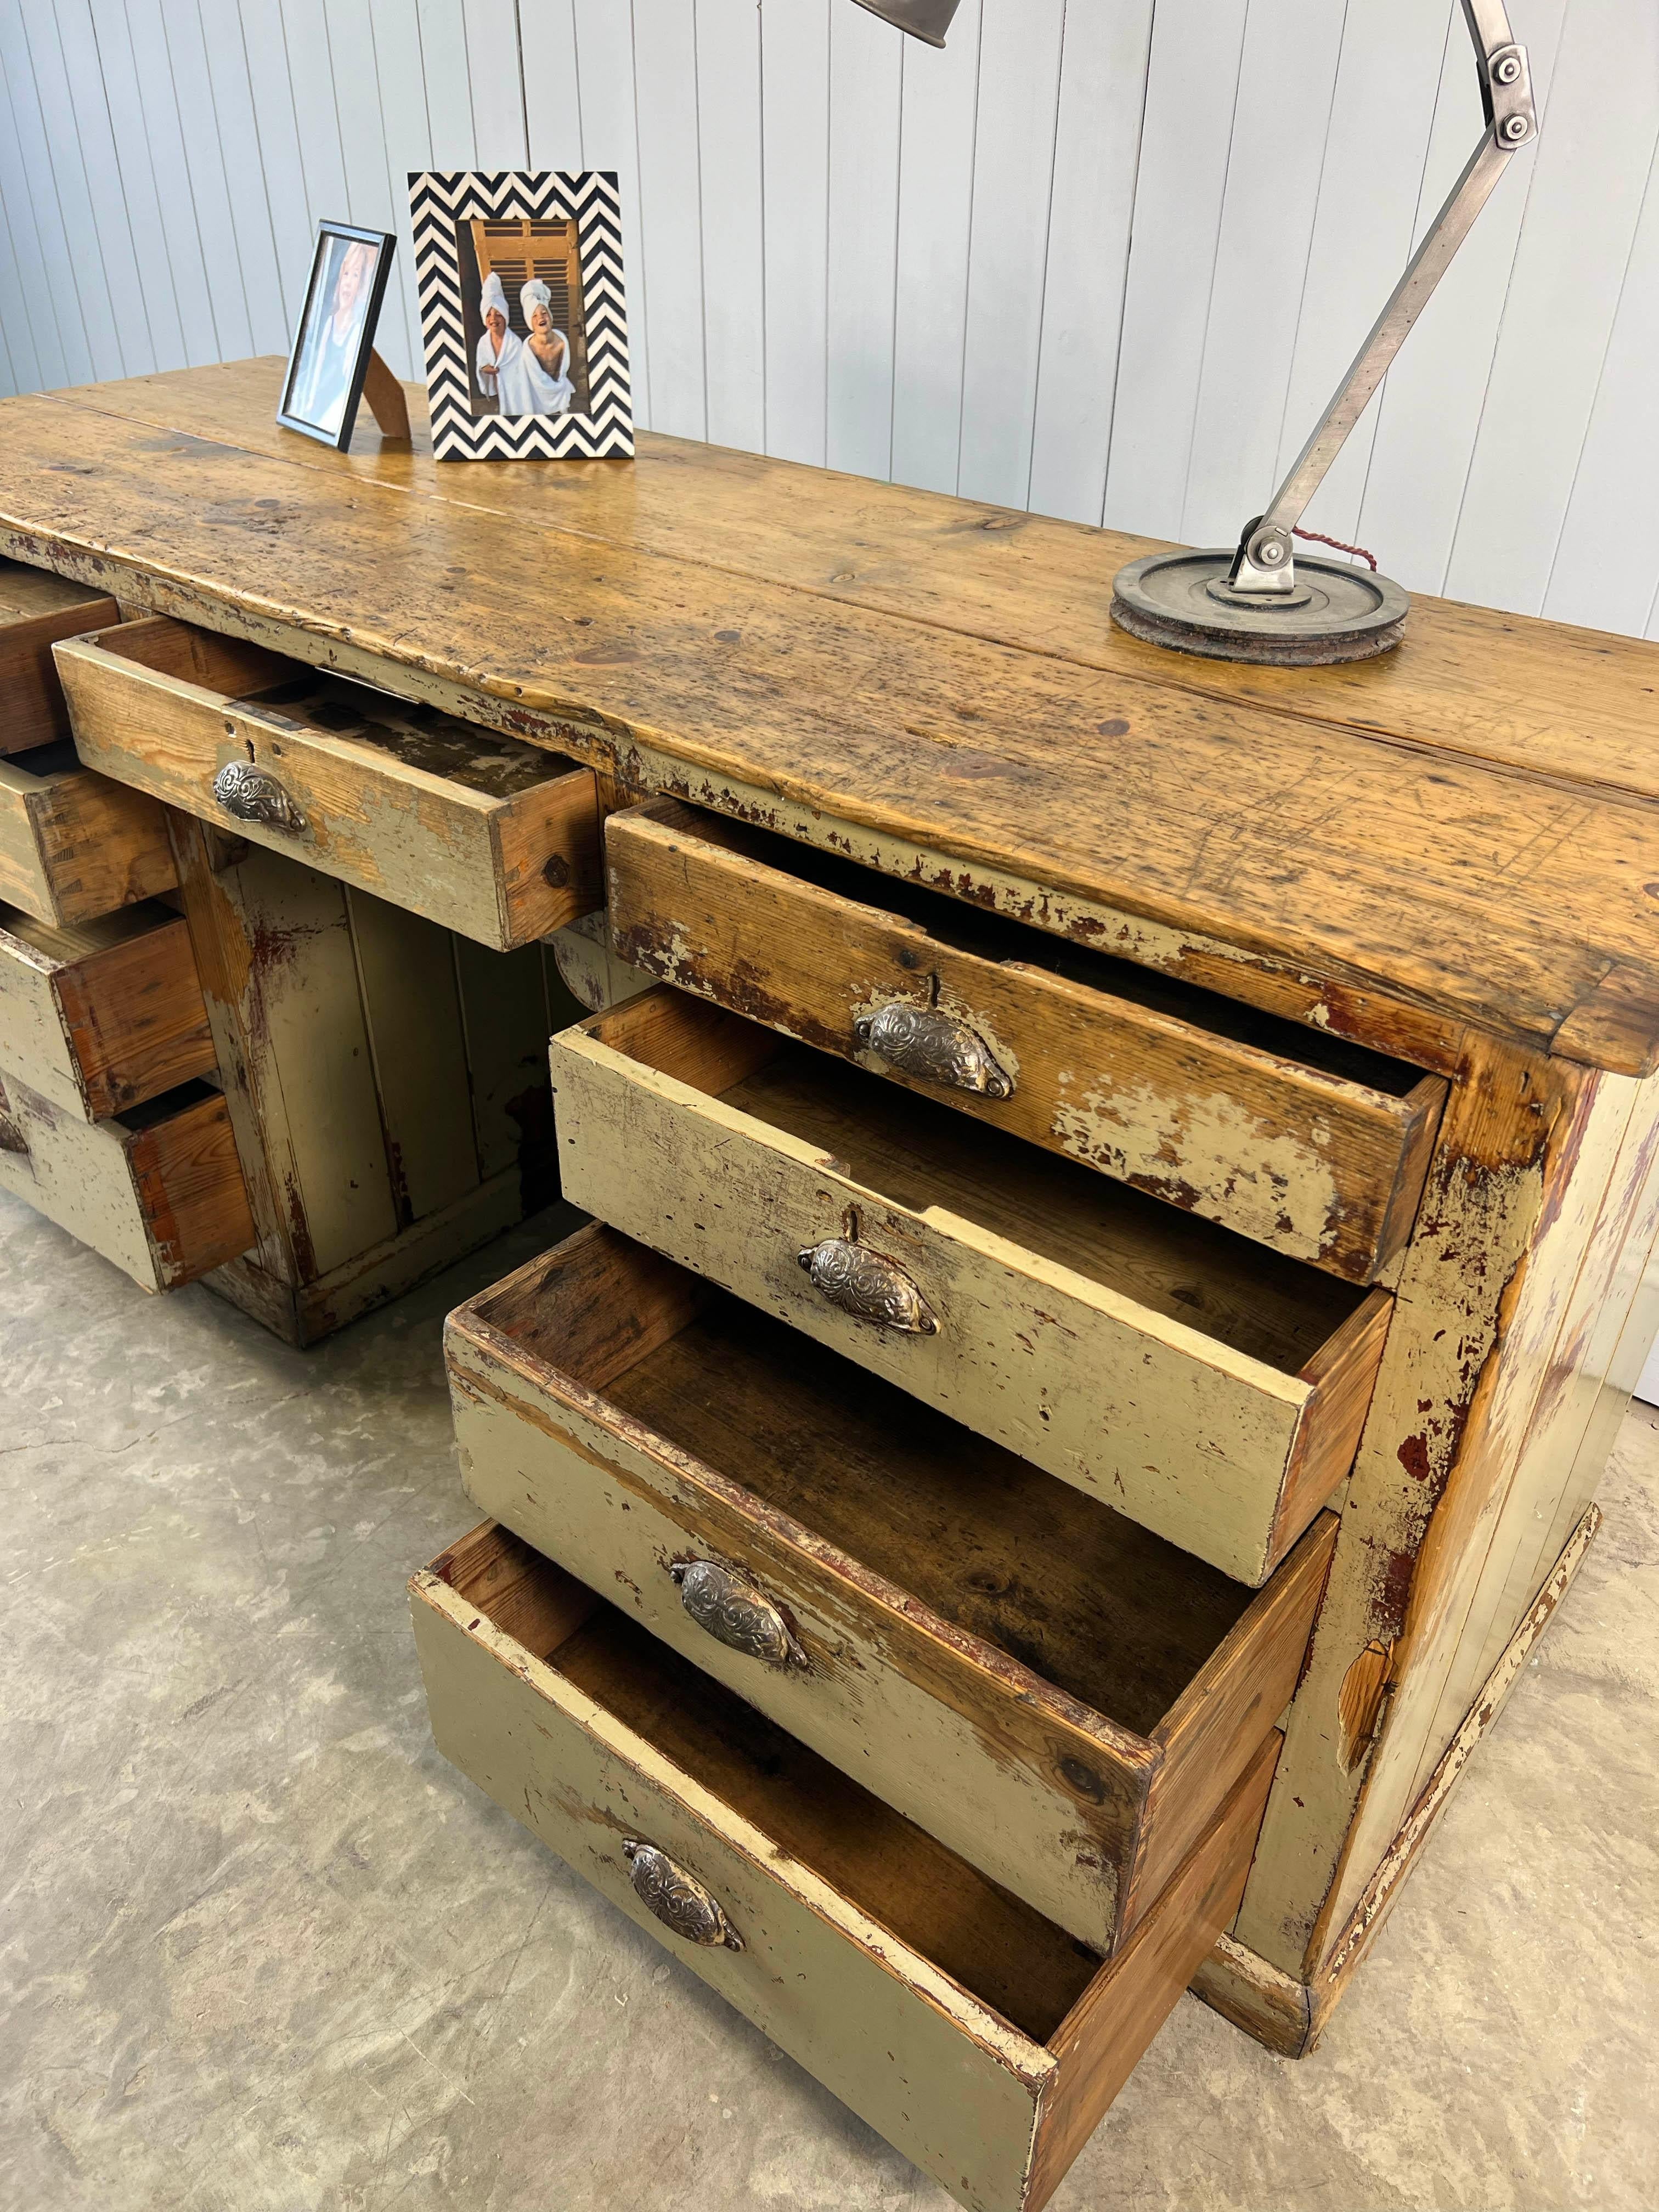 This antique desk was sourced from a printers in Nottingham.  It would have held the metal blocks used for type setting. The wood is pine with brass decorative cup handles.

It has a lovely vintage industrial feel to it.

All the drawers are in good